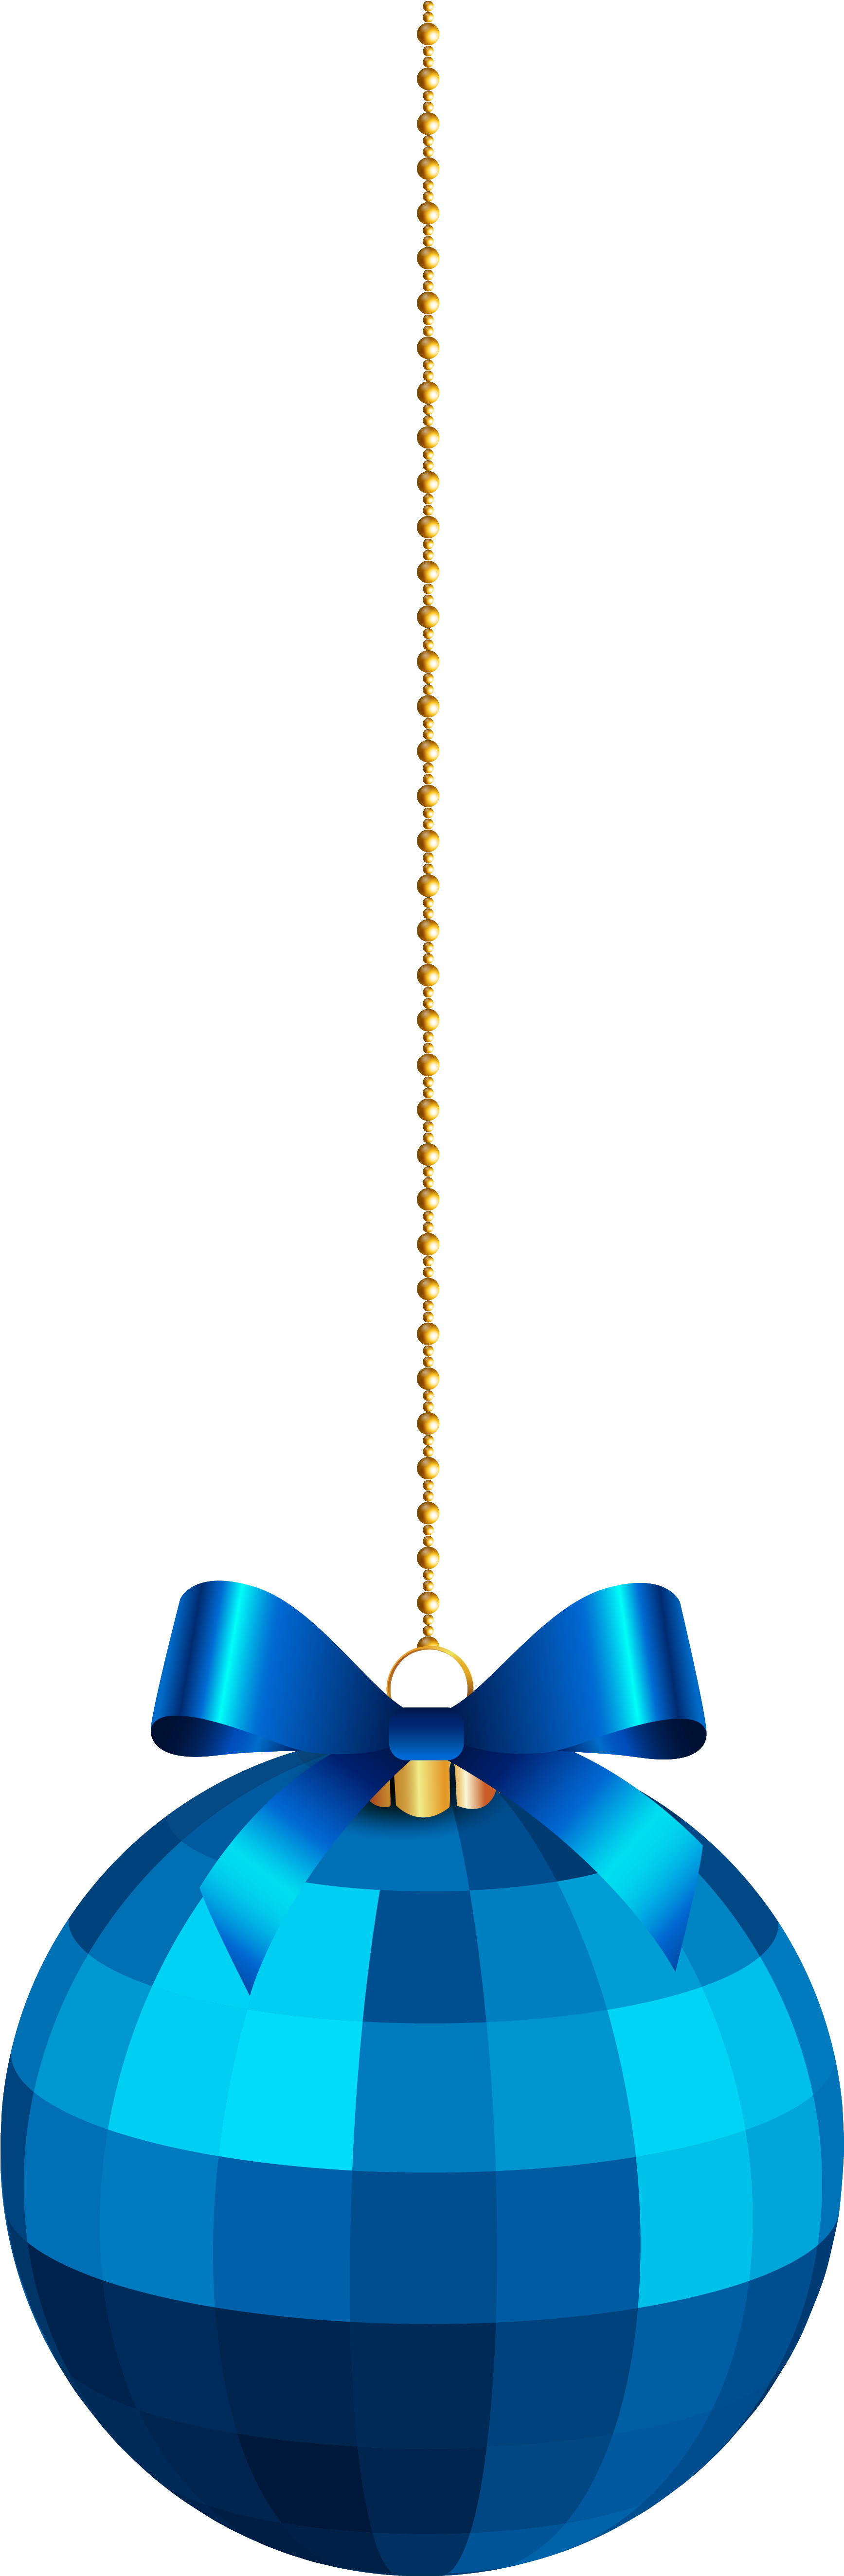 Hanging Christmas Ornaments Png Download - Blue Christmas Ball Hanging (1842x5356), Png Download